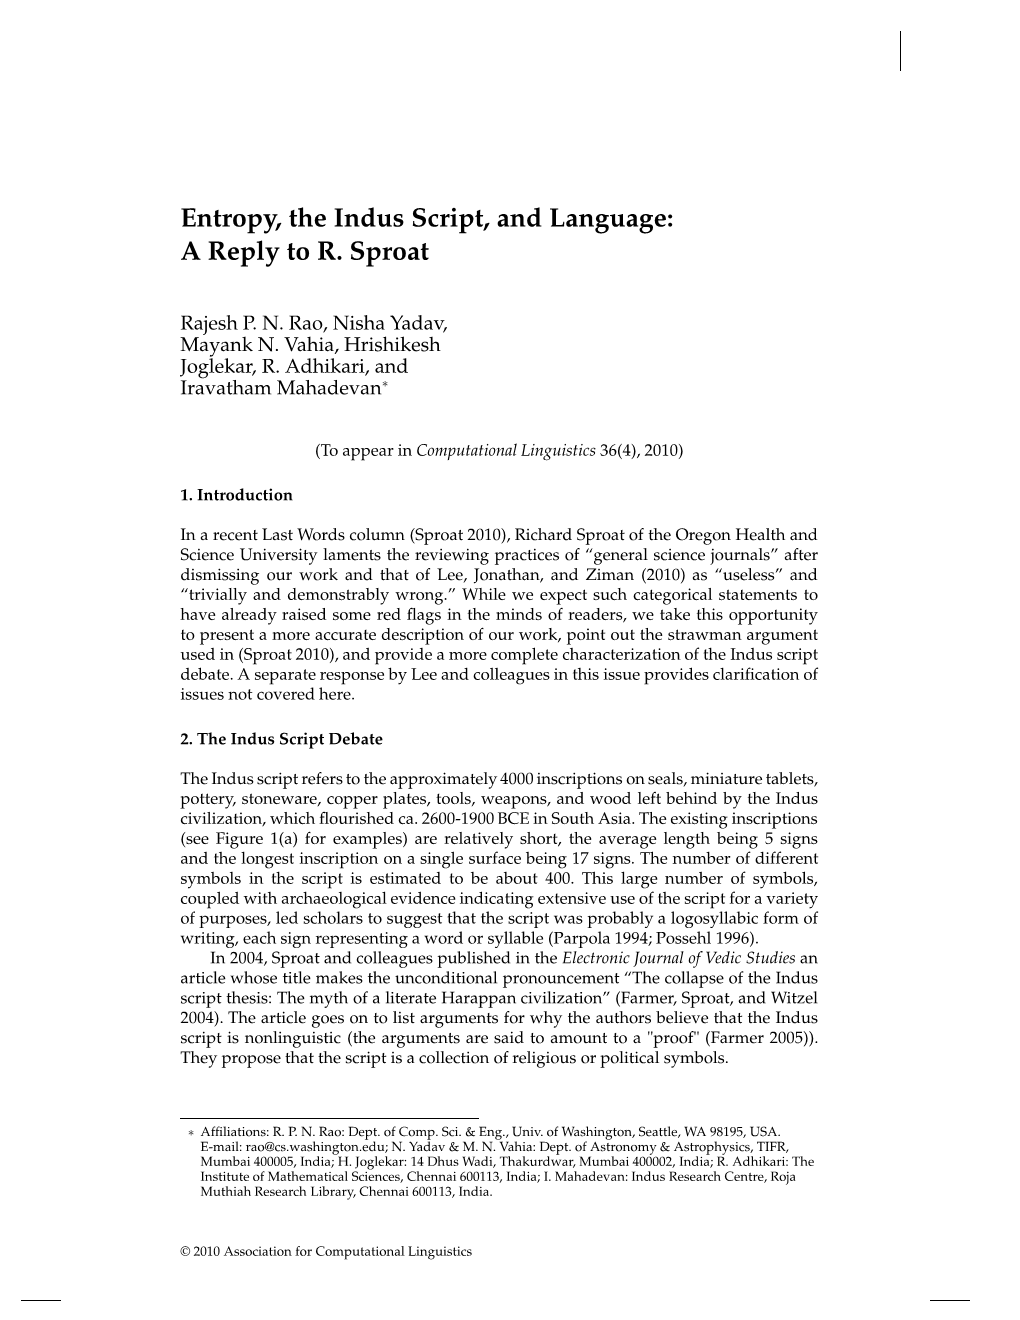 Entropy, the Indus Script, and Language: a Reply to R. Sproat